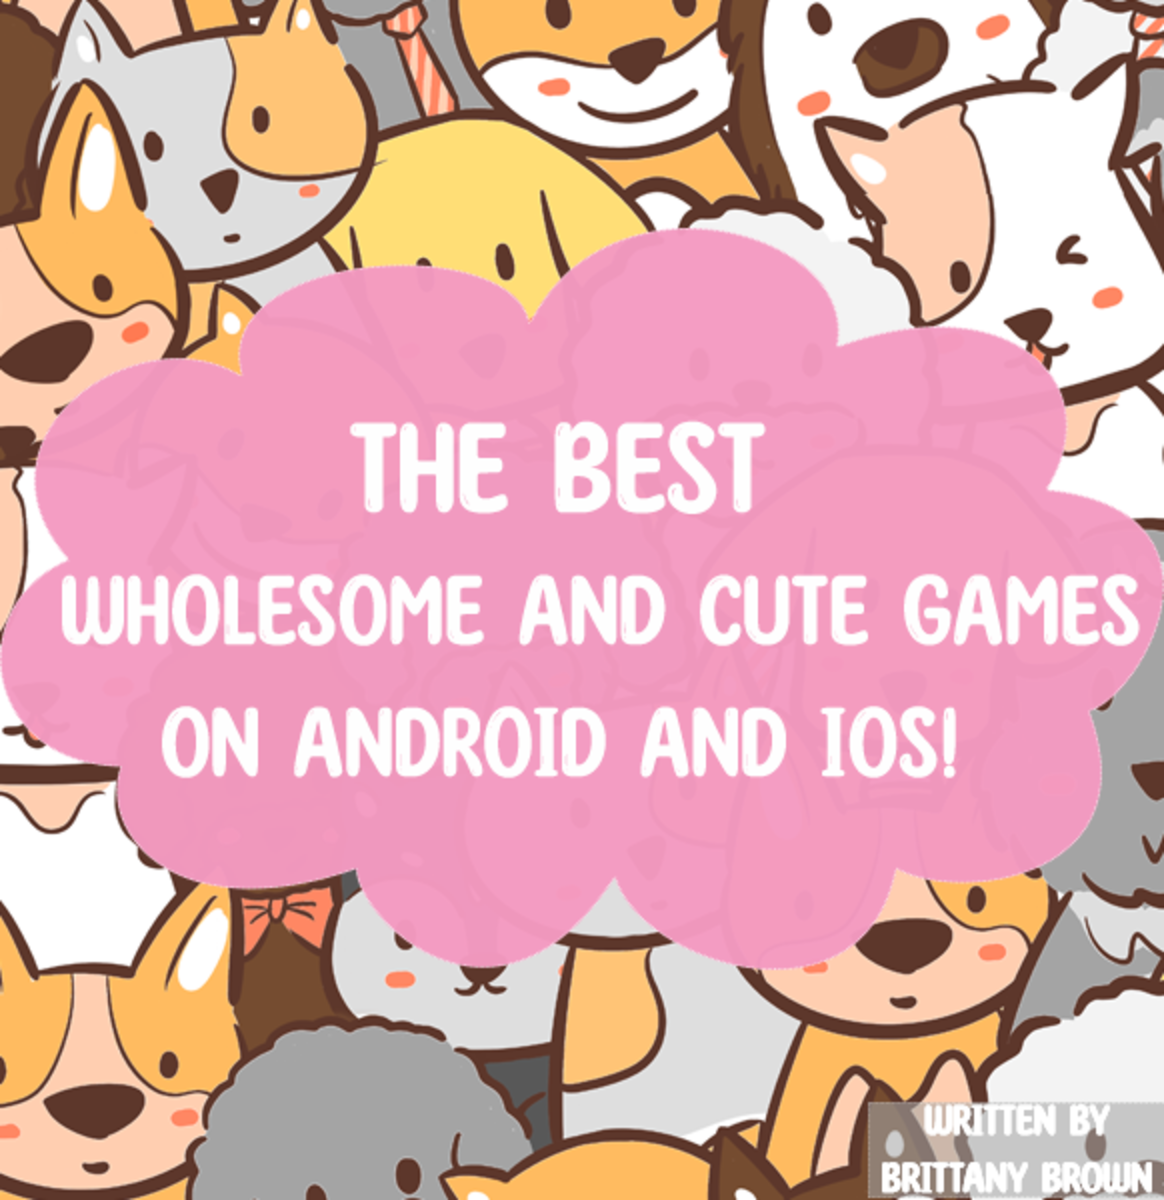 The Best Wholesome and Cute Games for Android and iOS!